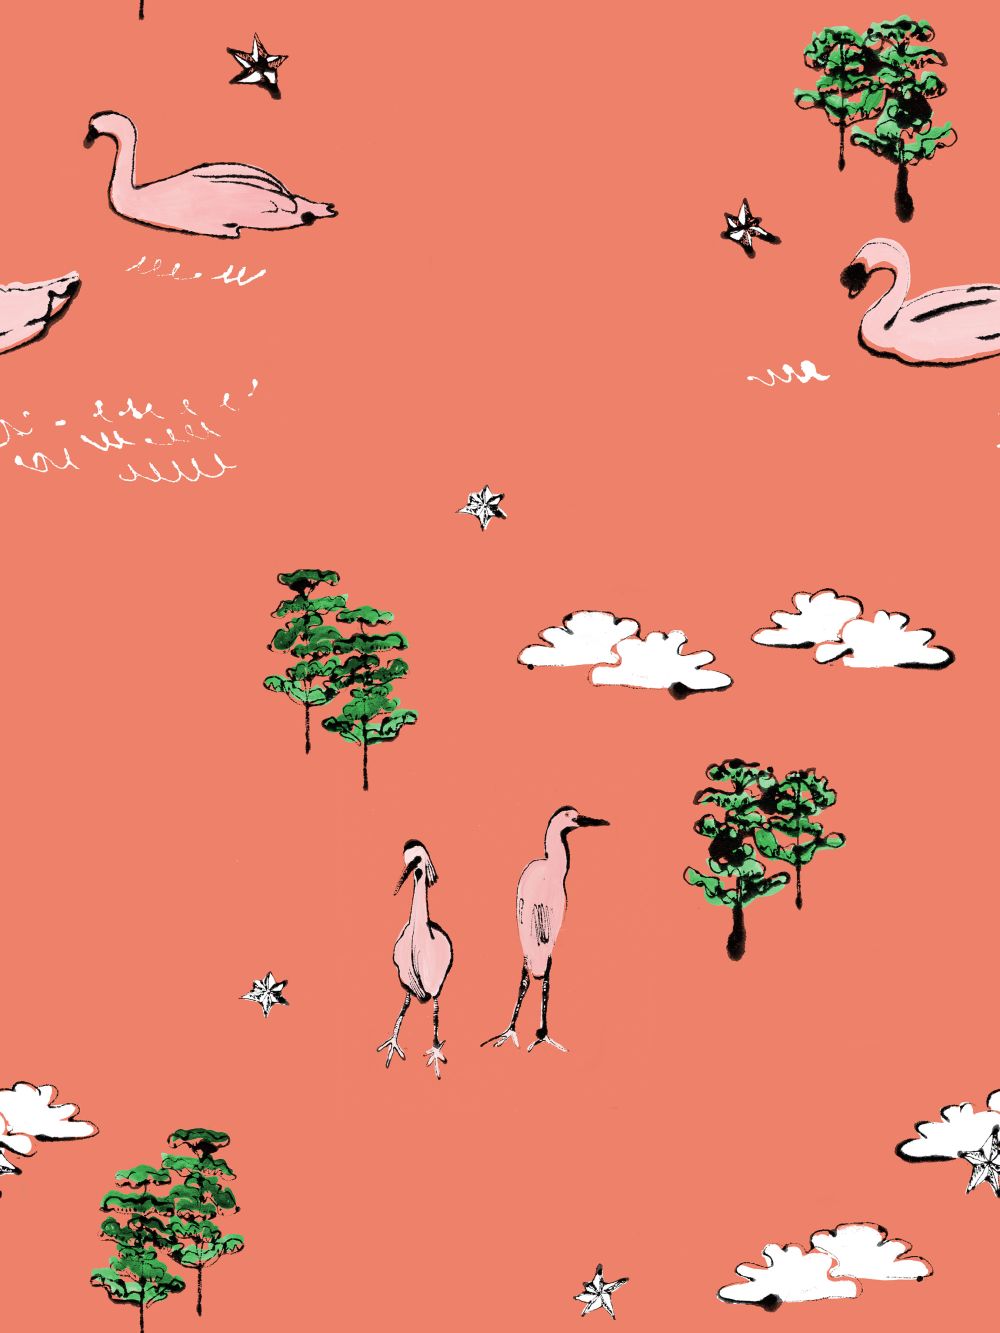 A wallpaper design featuring trees, clouds and birds by the brand Nottene